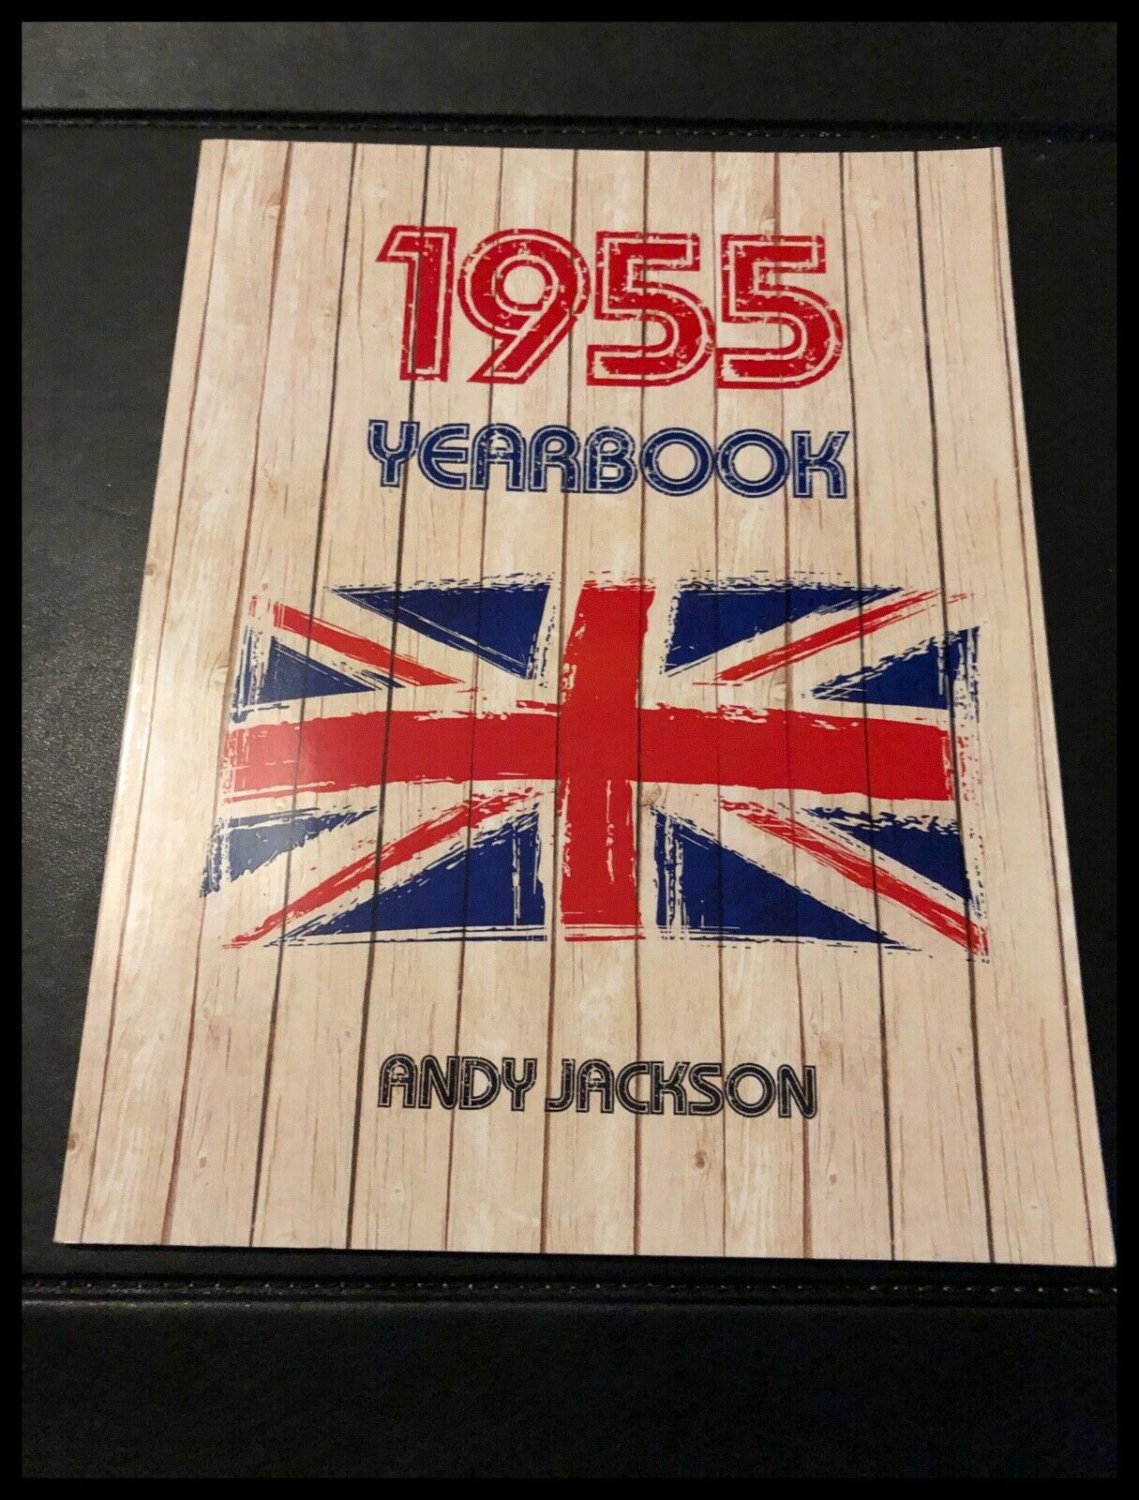 1955 Yearbook by Andy Jackson (Paperback Book 2015) Published in the UK